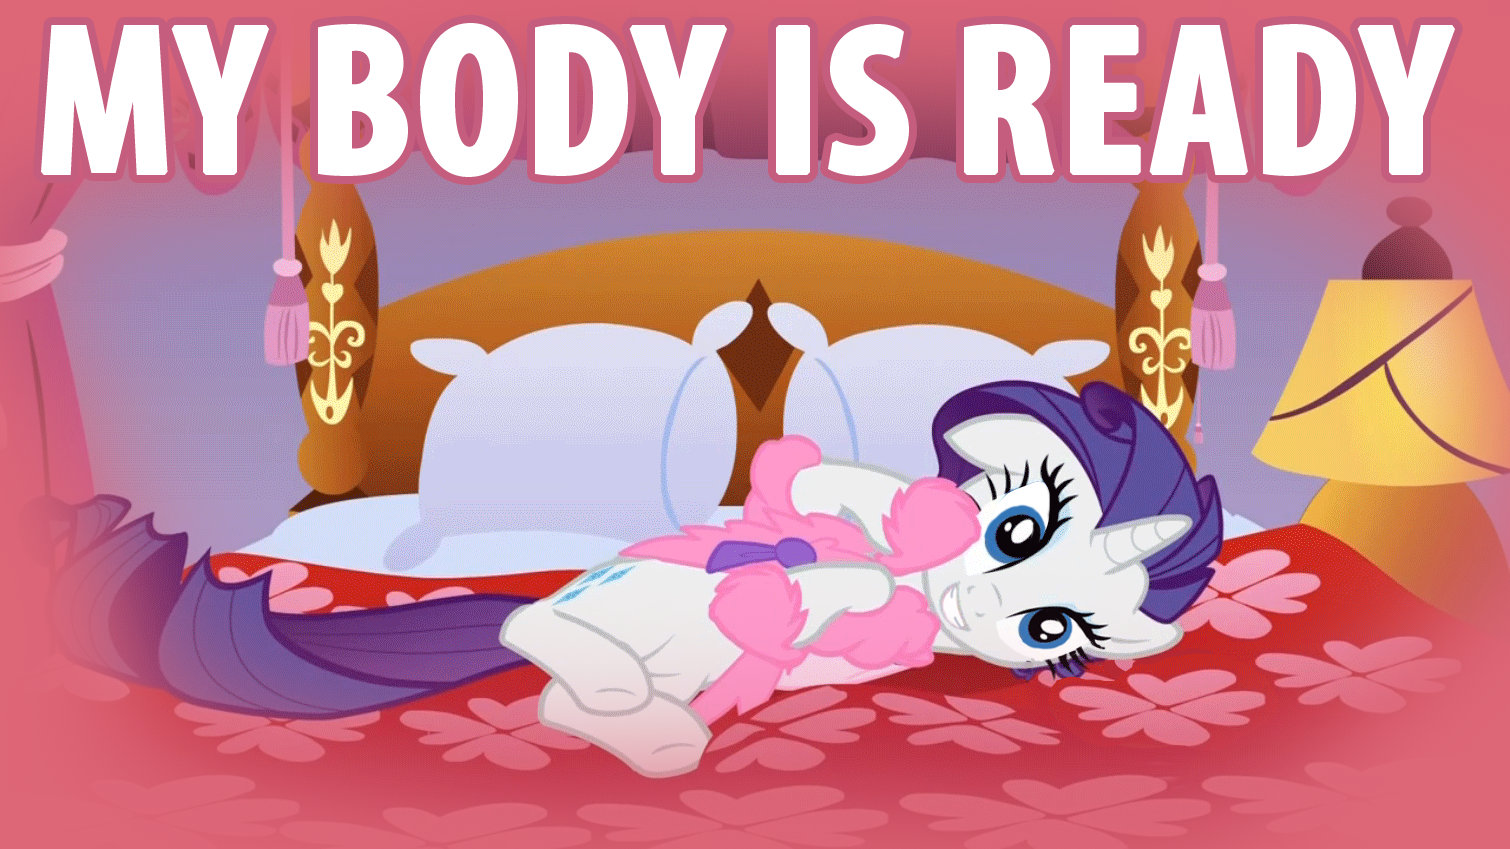 [Bild: my_body_is_ready_by_chipettes33-d4cekd4.png]